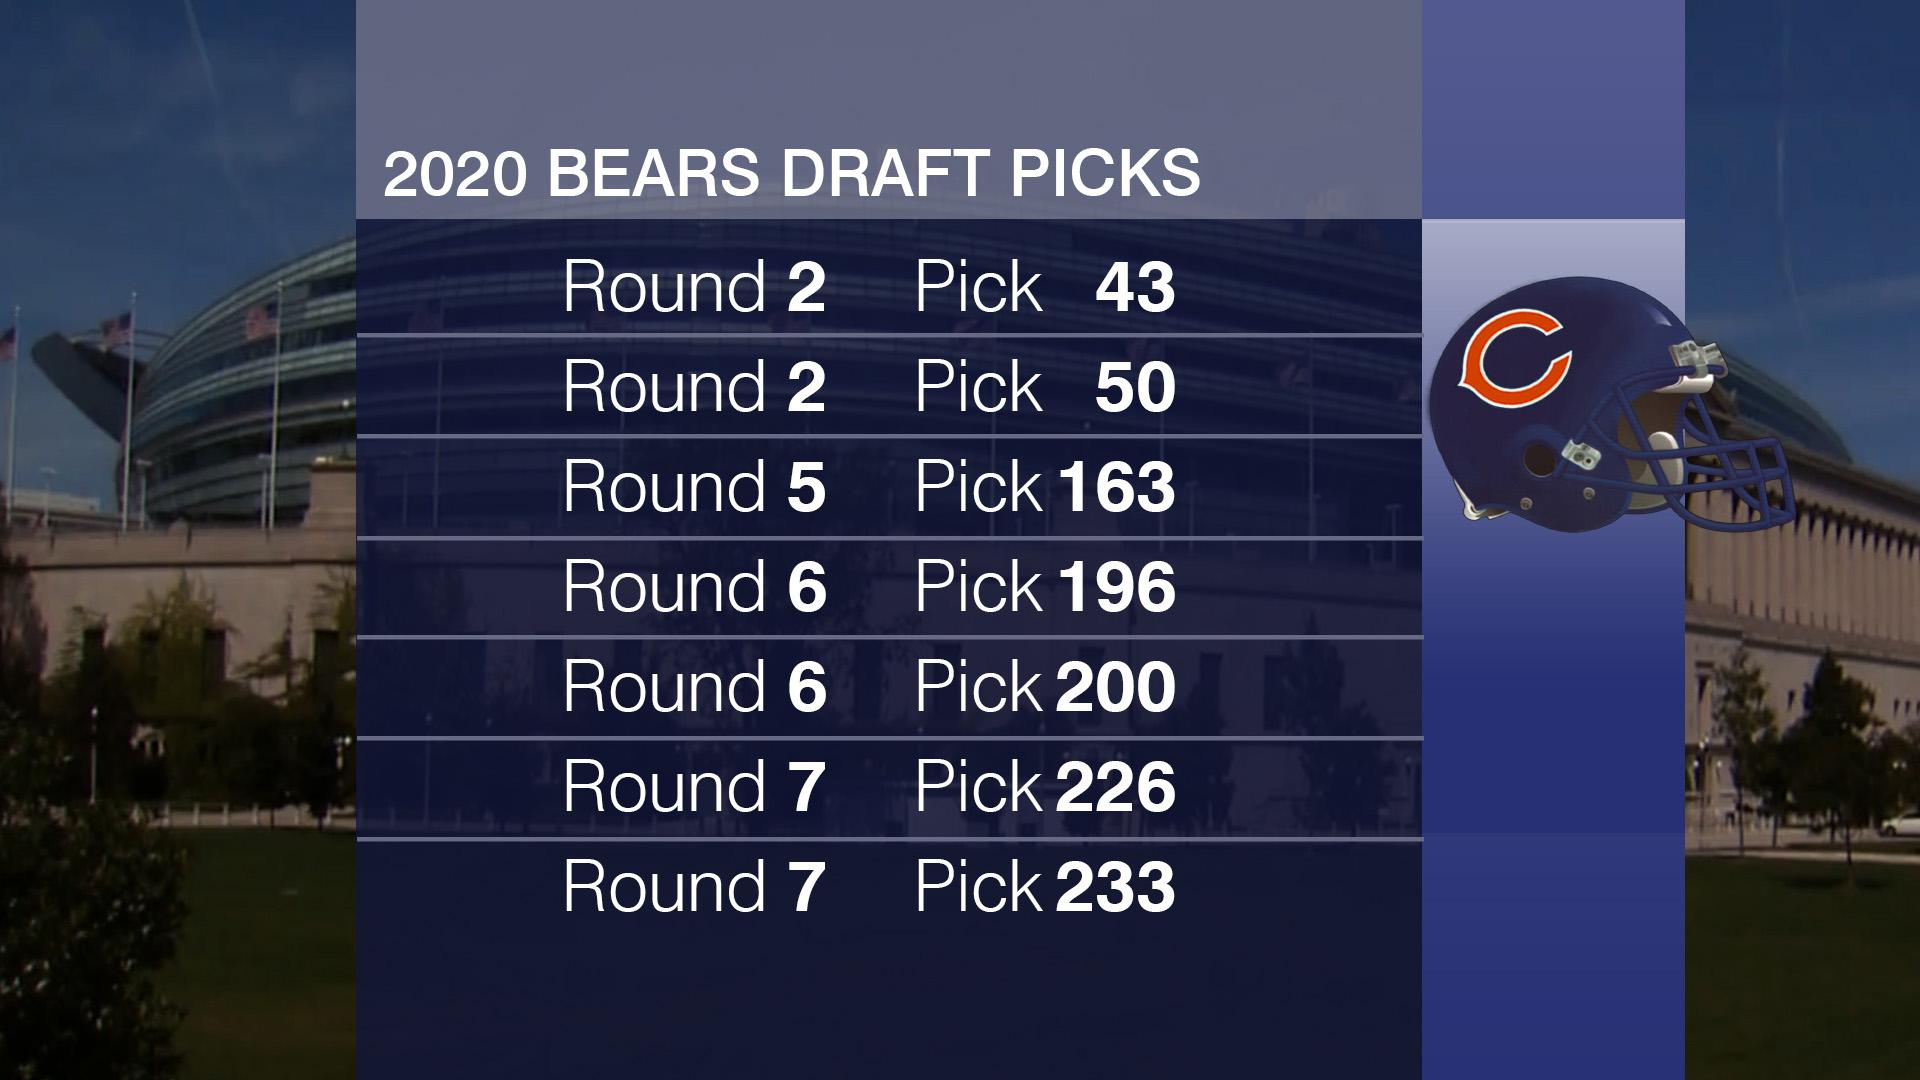 NFL Draft Goes Virtual What Are the Bears Biggest Needs? Chicago